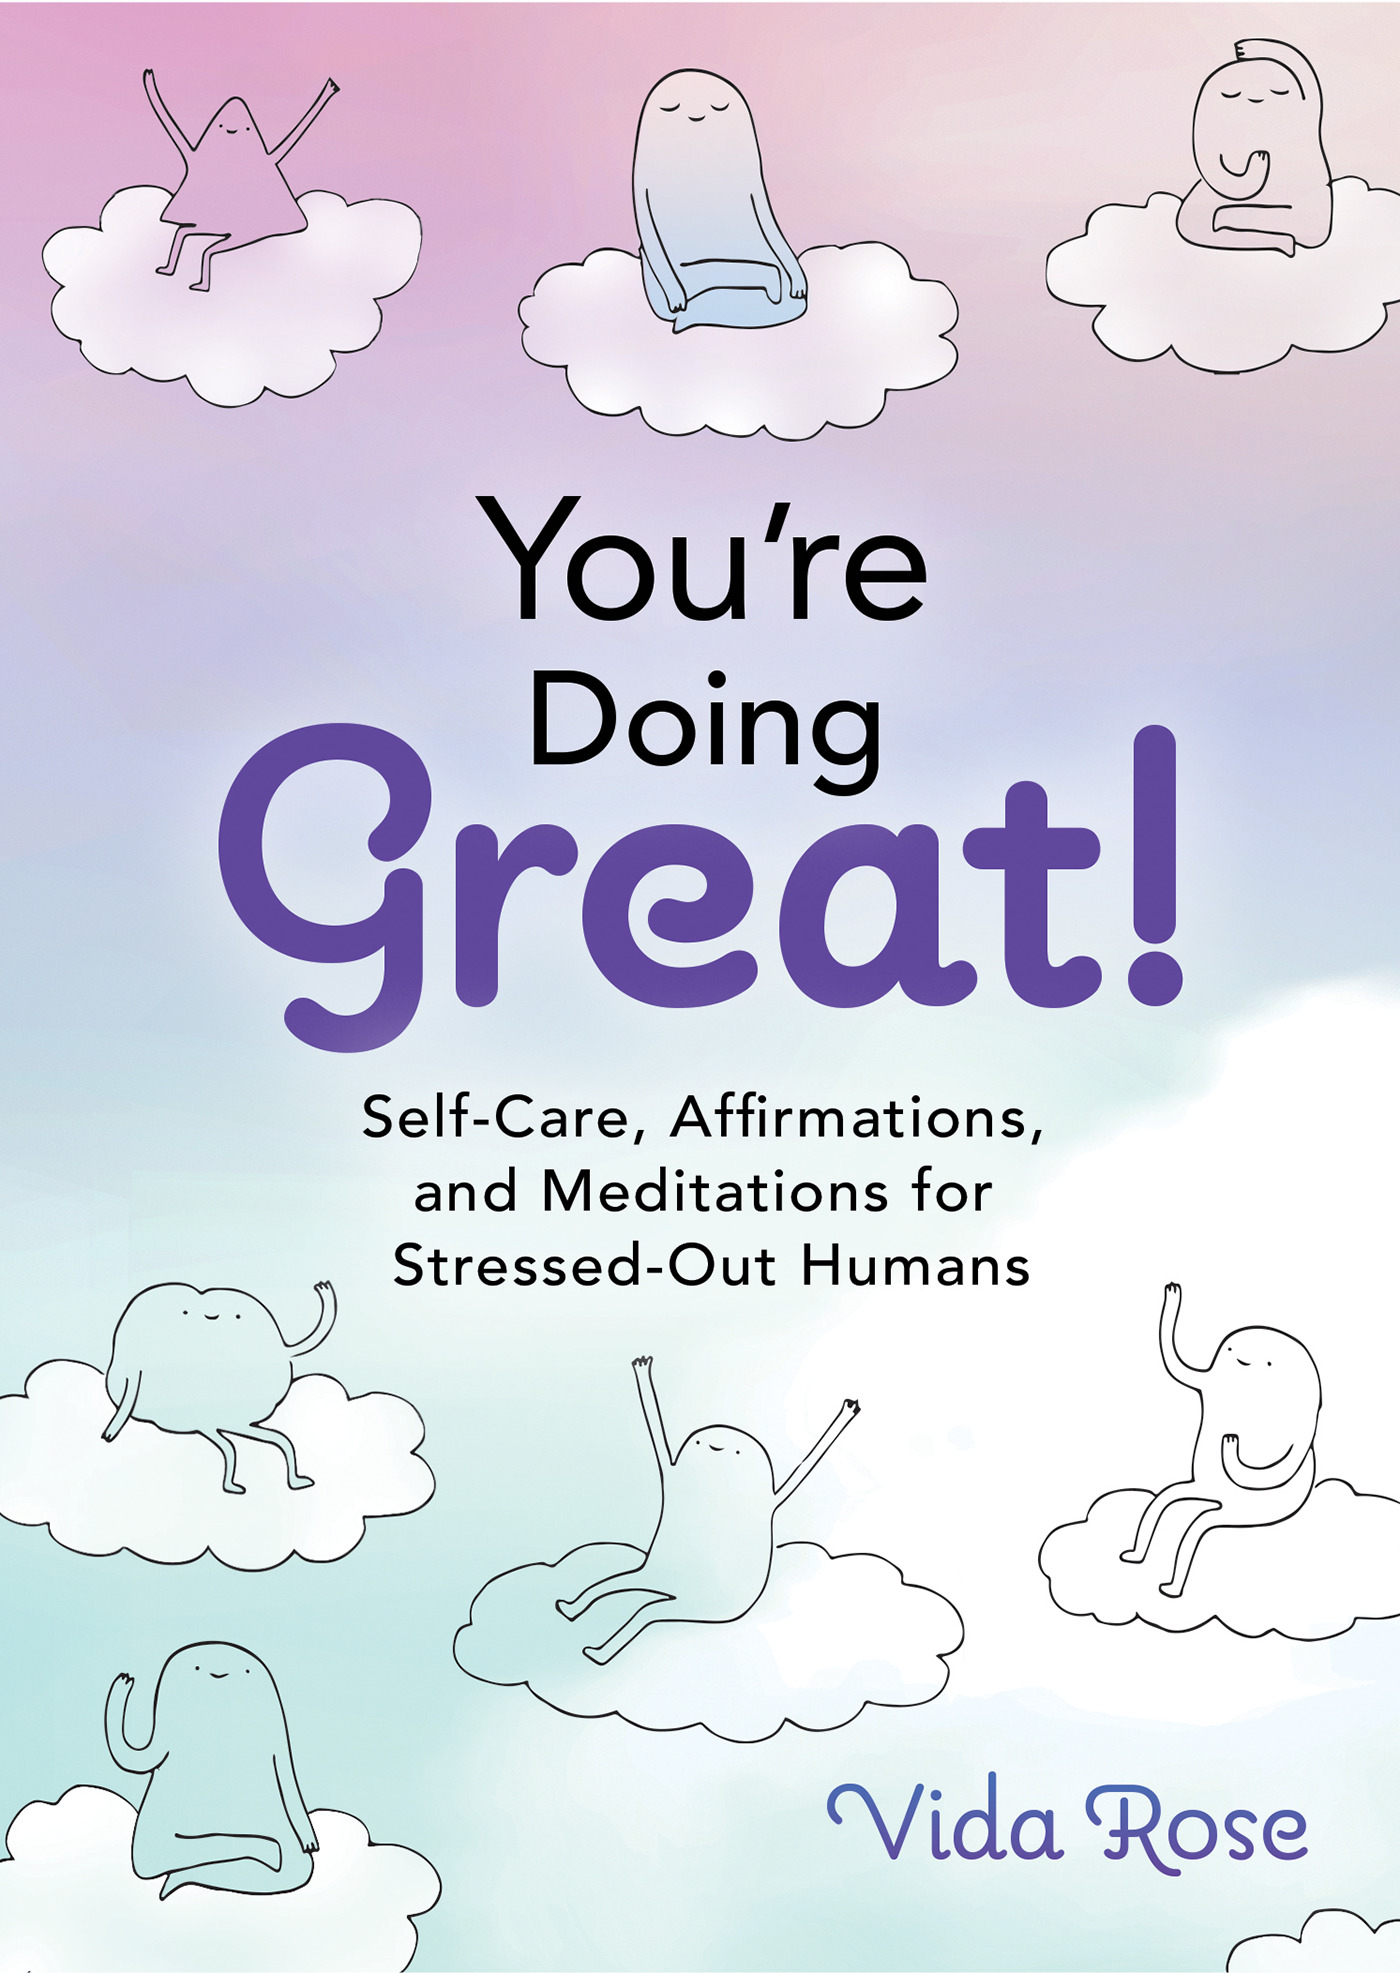 You're Doing Great! : Self-Care, Affirmations, and Meditations for Stressed-Out Humans | Vida Rose (Auteur)